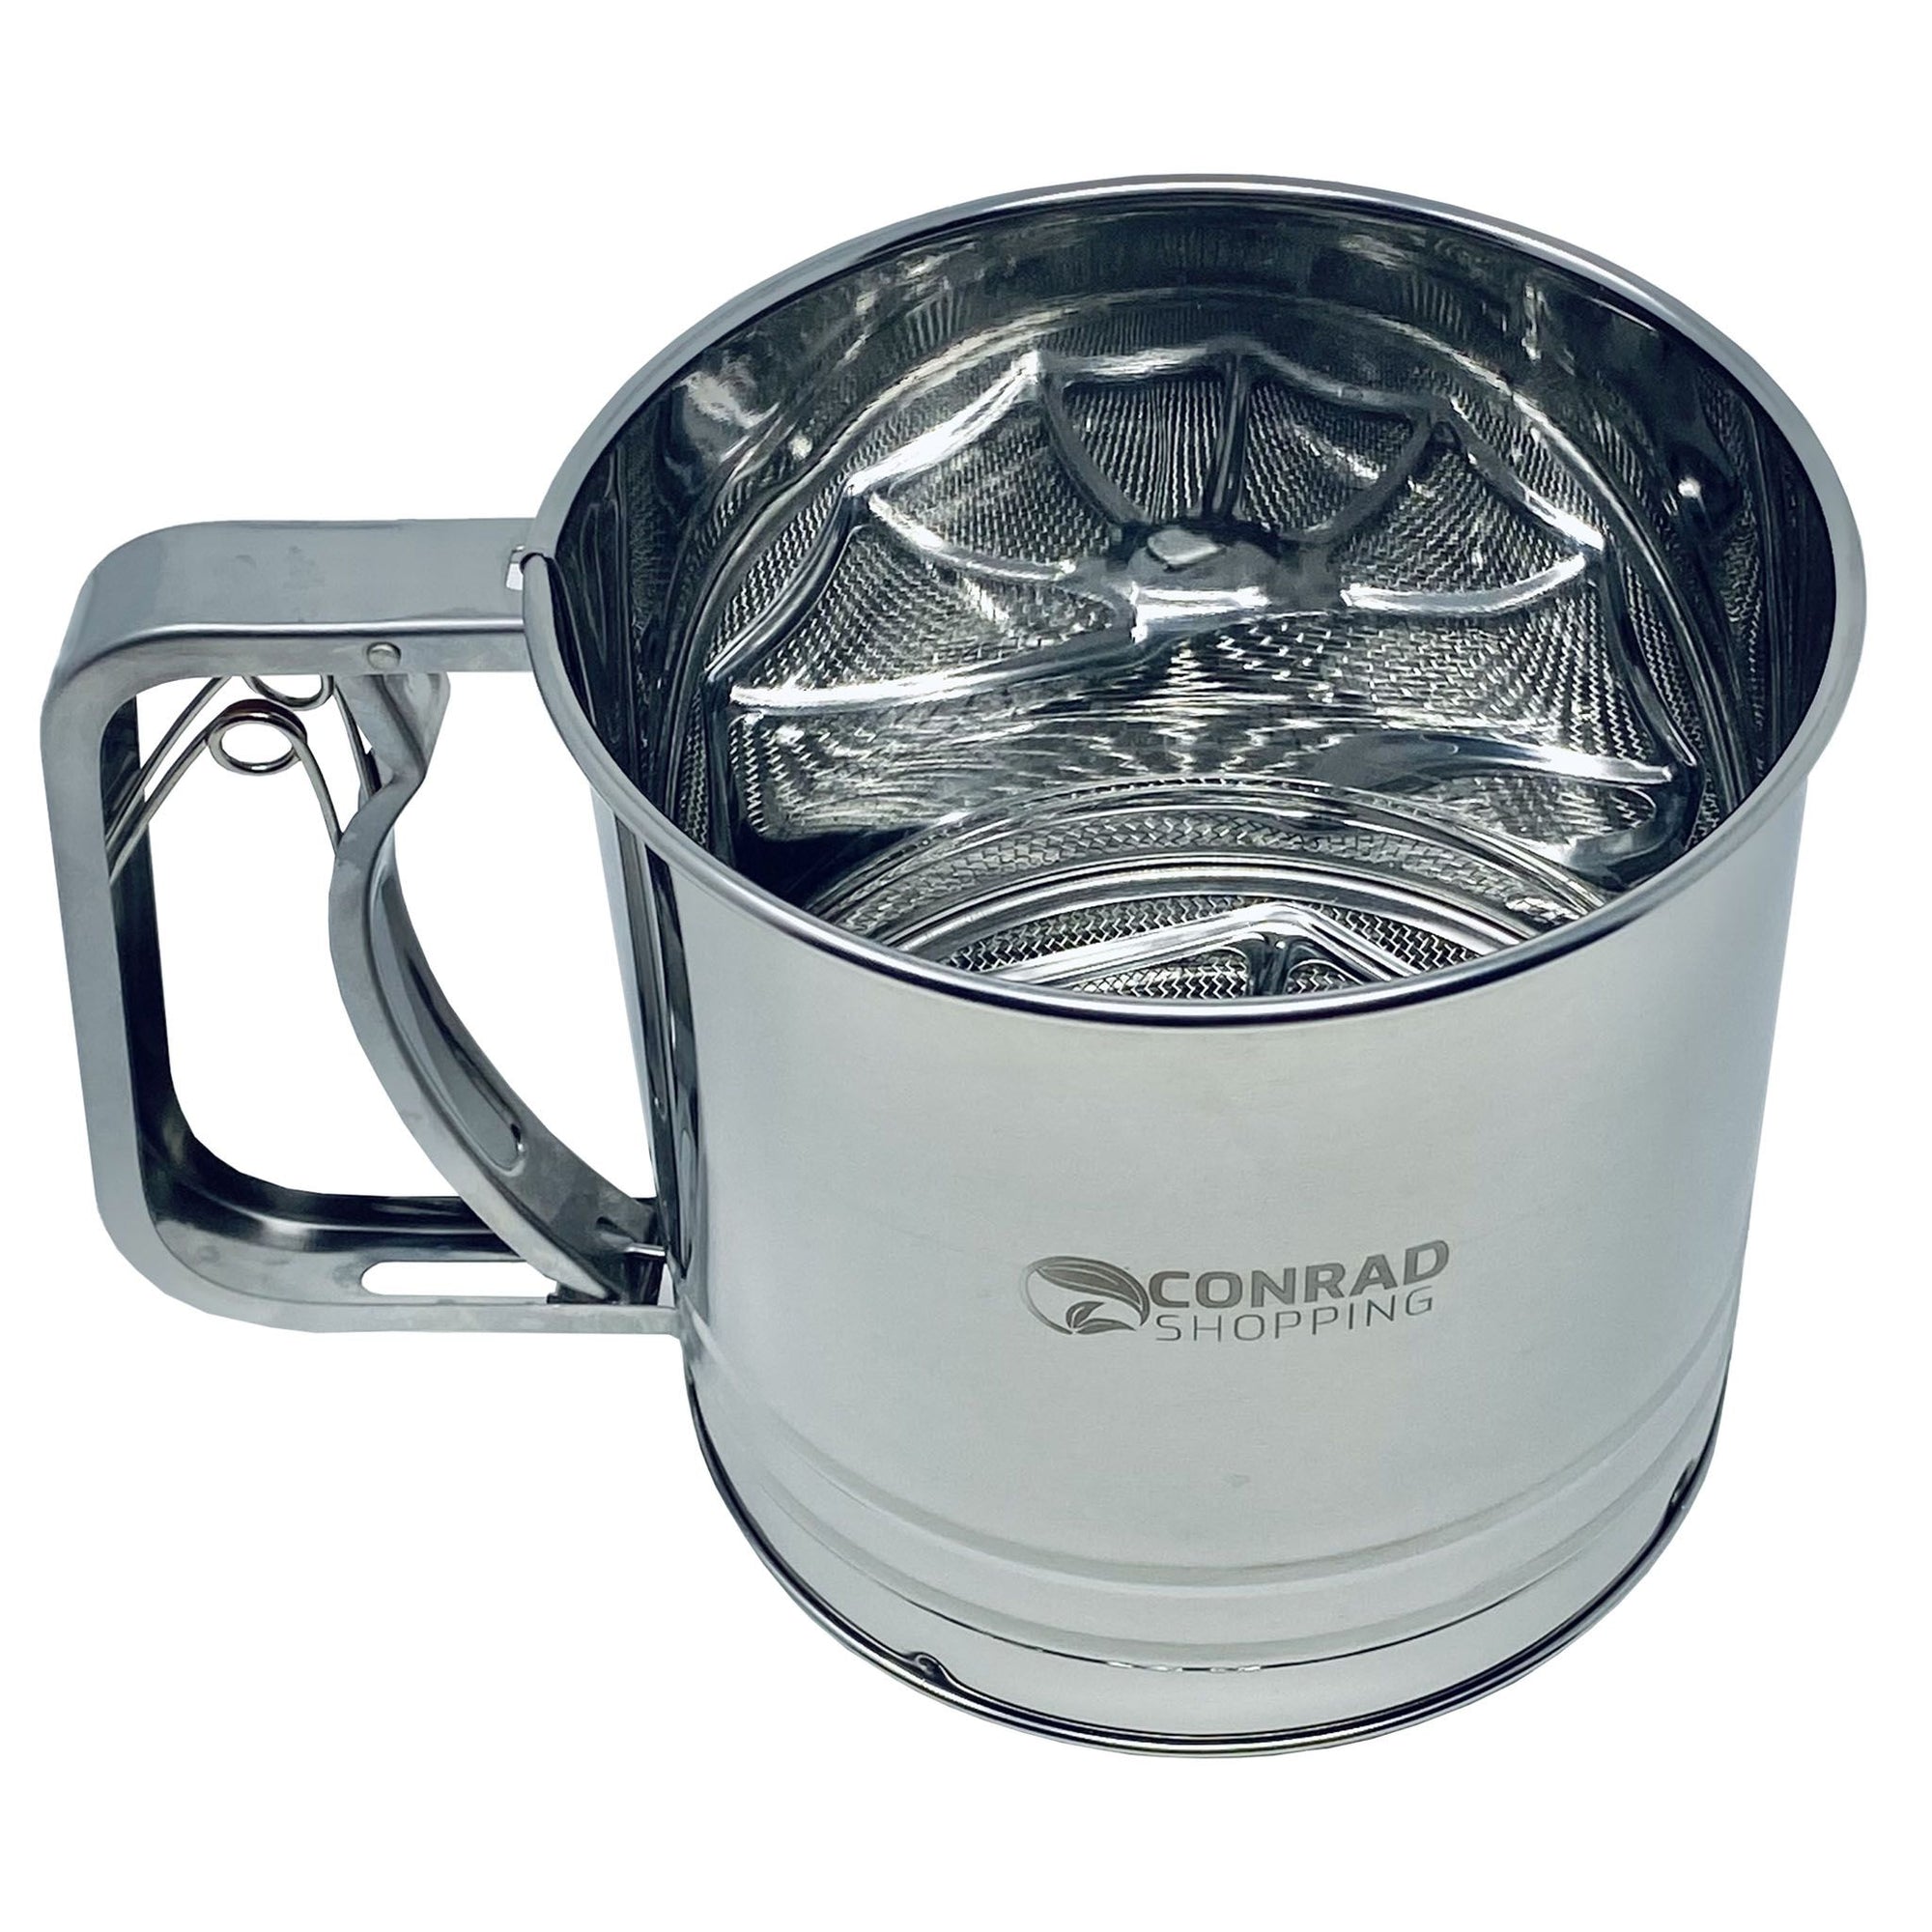 Conrad Shopping Stainless Steel Flour Sifter